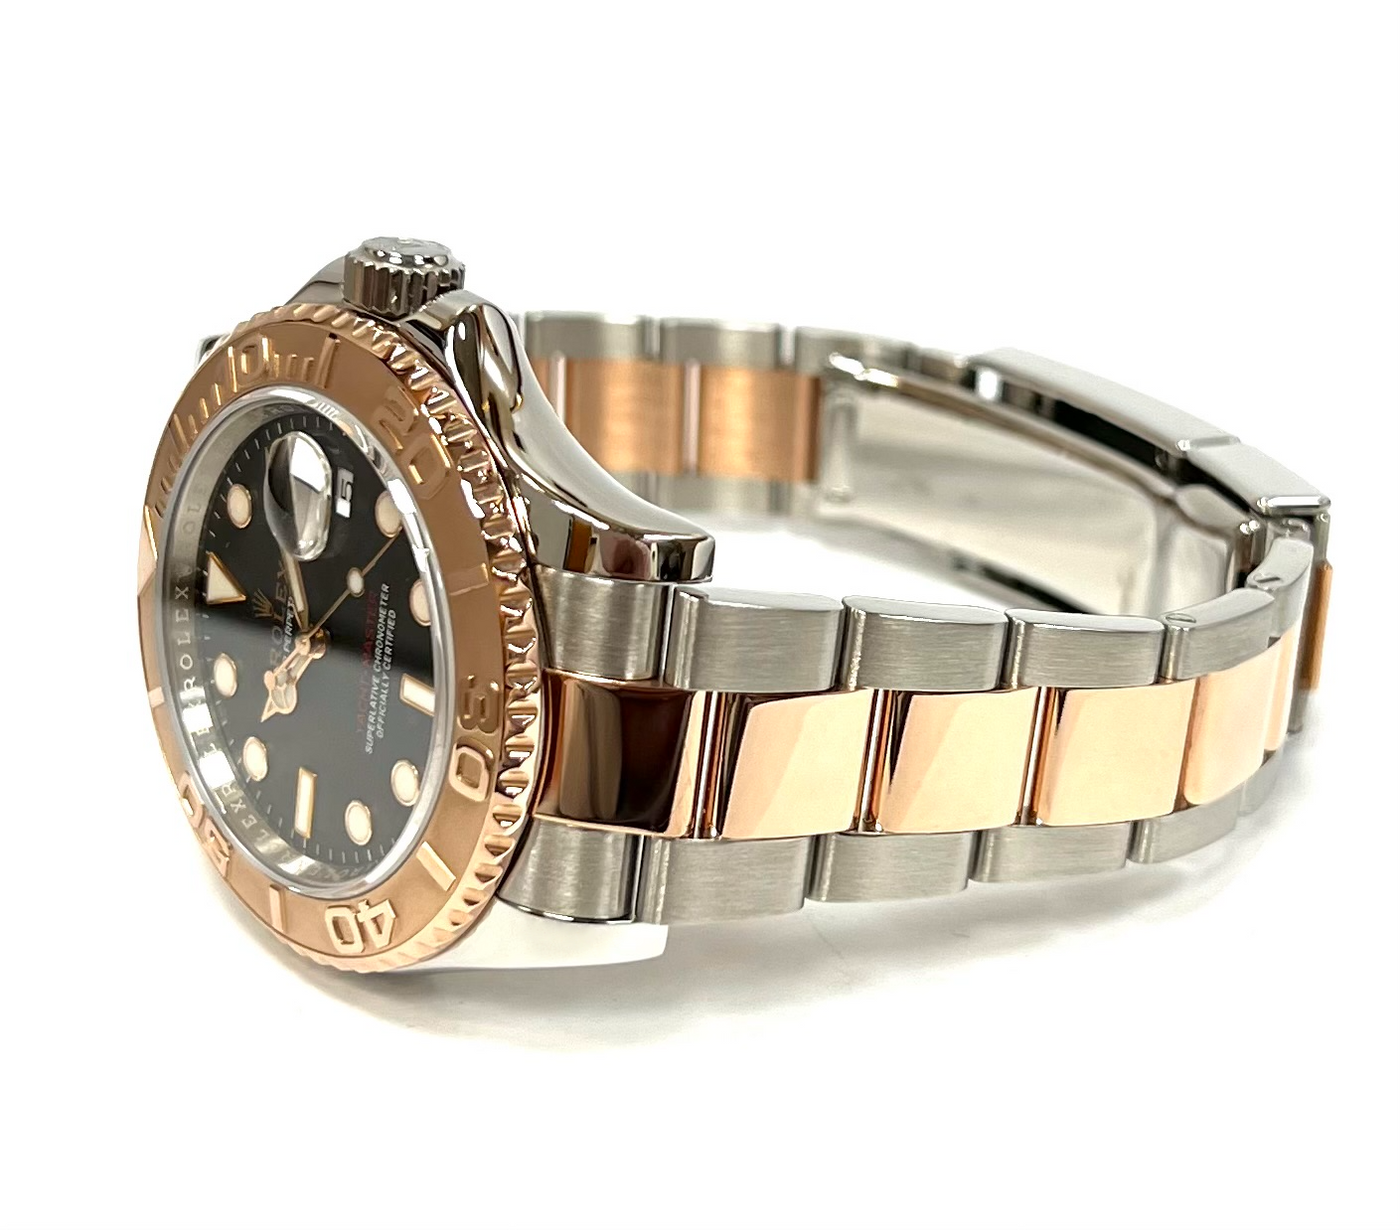 Rolex Yachtmaster I Two-Tone 116621